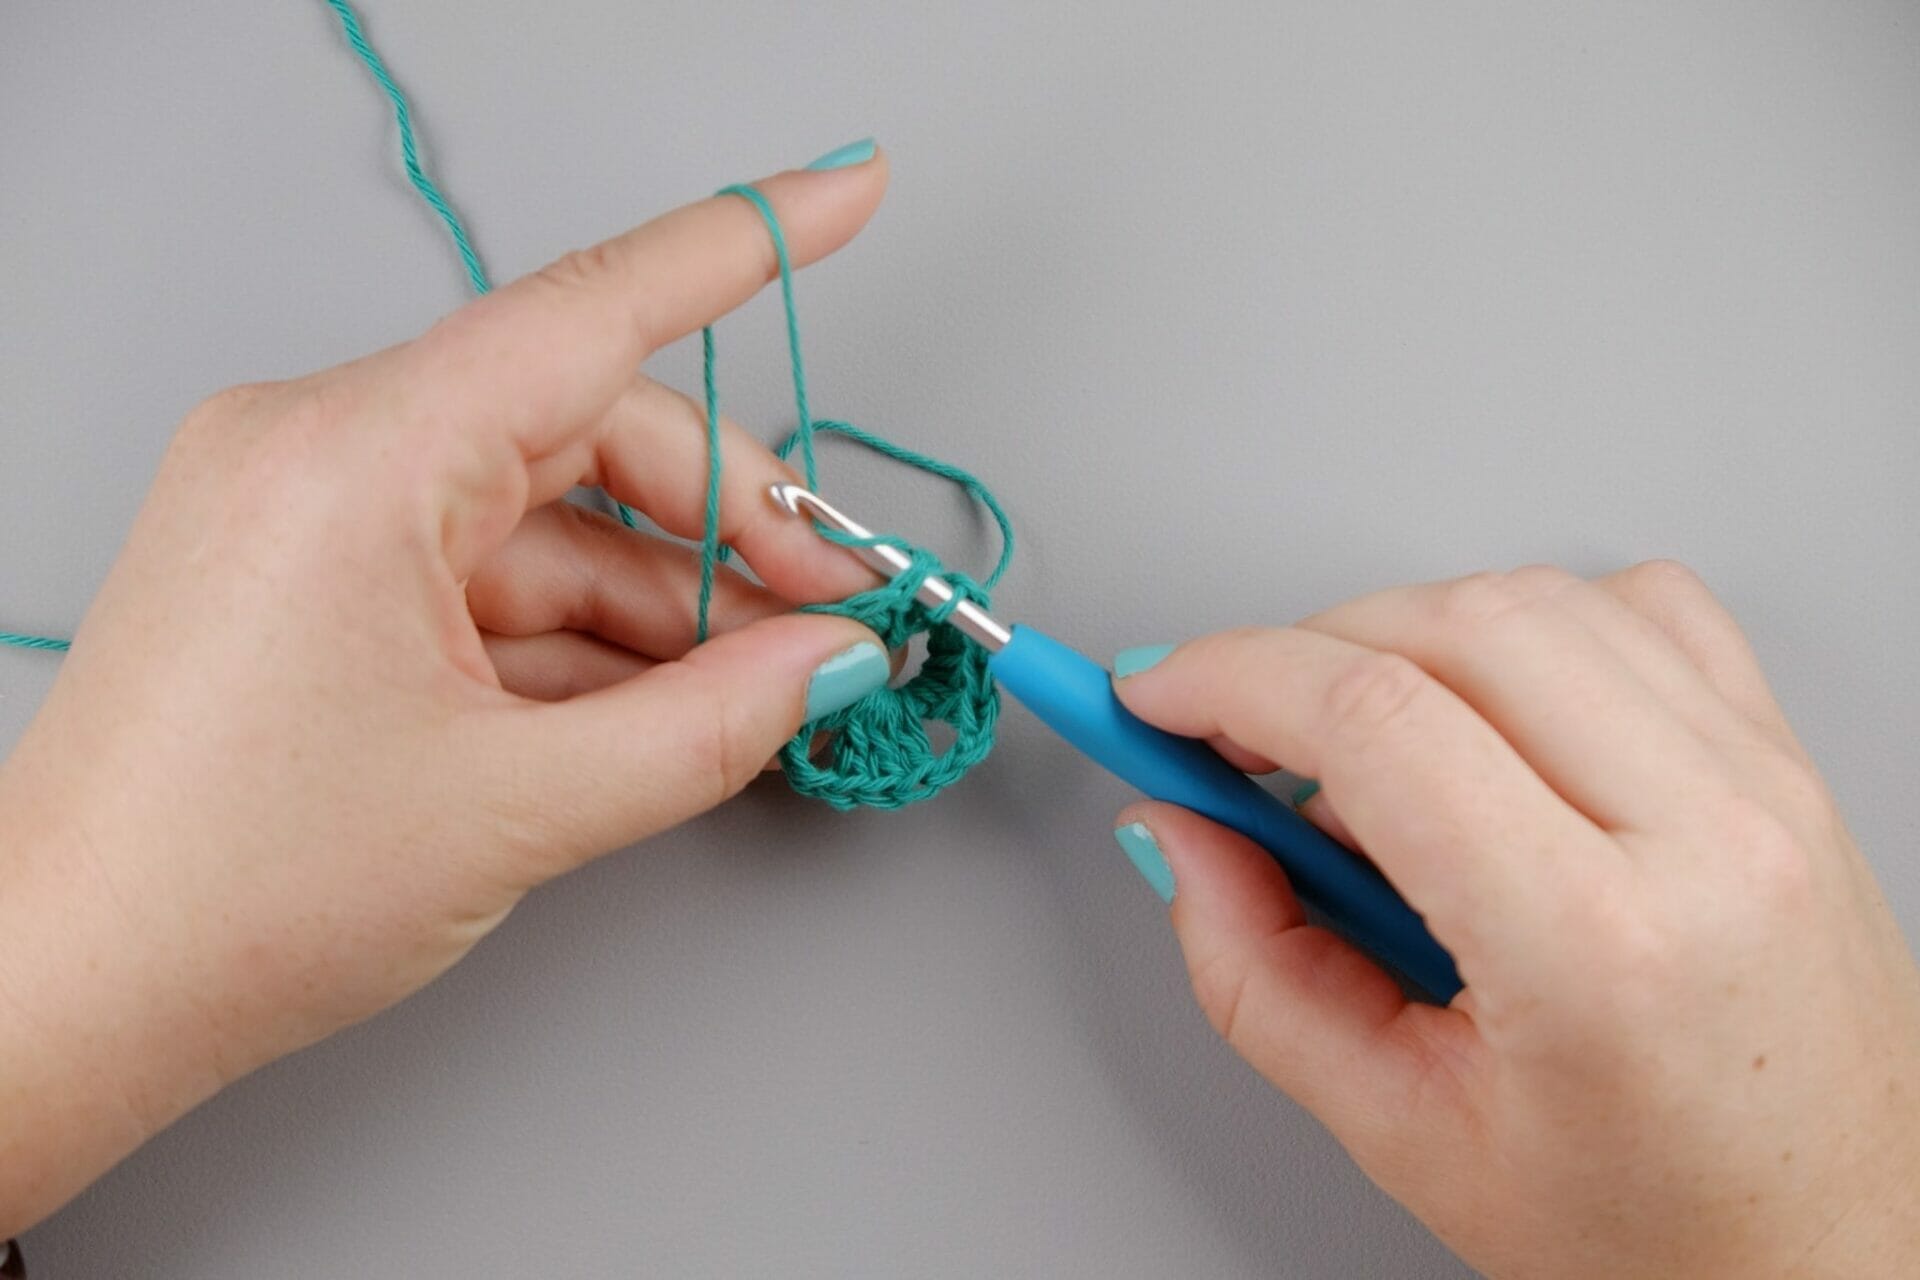 What Is an Alternative for a Crochet Needle?